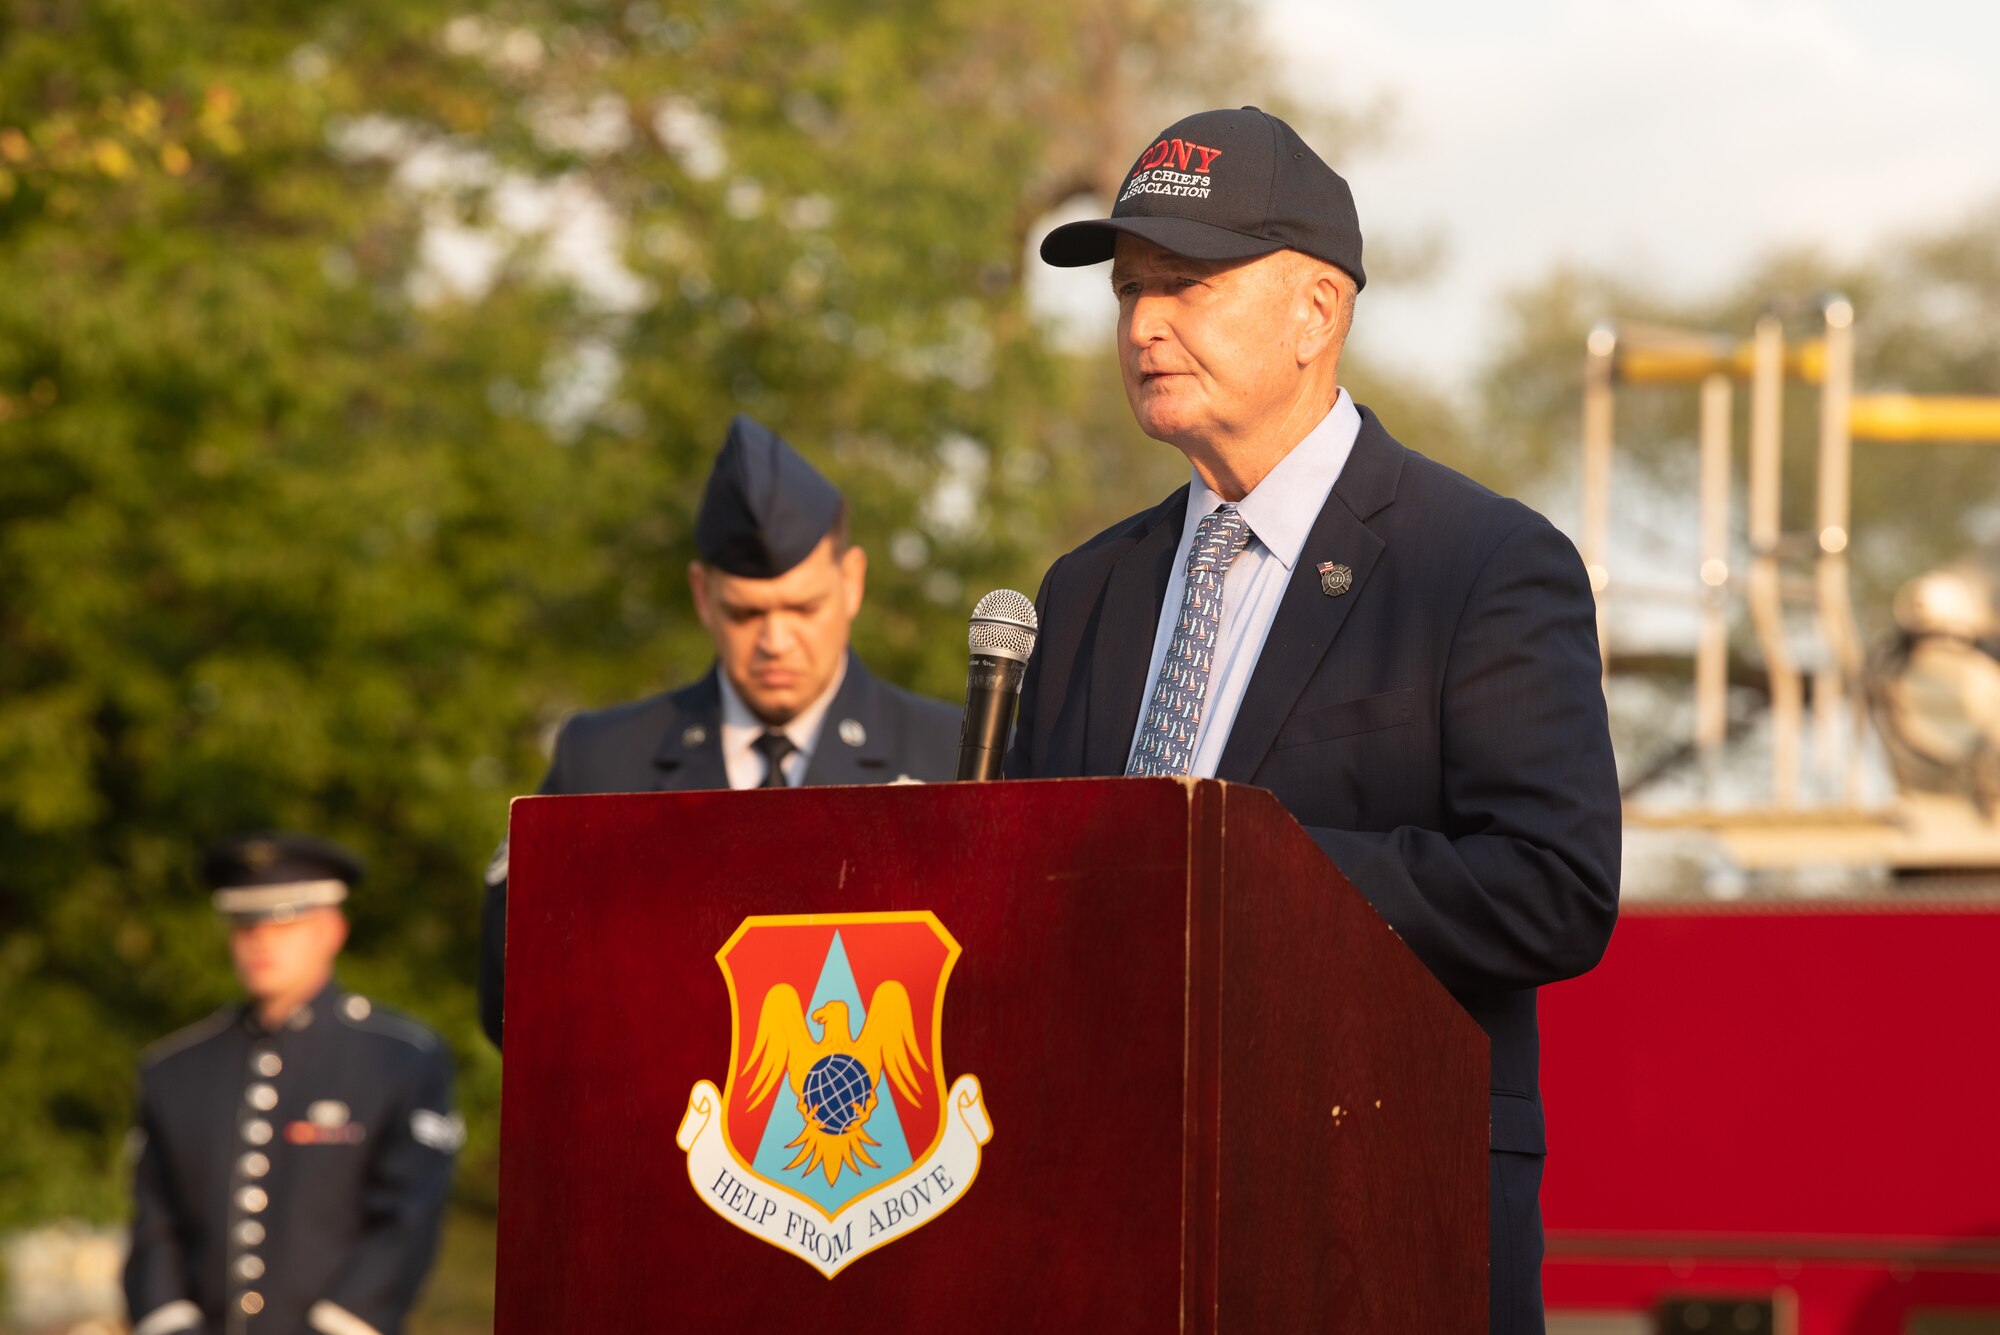 Charles Blaich, retired New York Deputy Fire Chief, speaks on his experience responding to the 9/11 terrorist attacks at the 9/11 remembrance ceremony on Scott Air Force Base, Illinois, September 10, 2021. Blaich also spoke on his experience leading recovery efforts in the months following the terrorist attacks on September 11, 2001. (U.S. Air Force photo by Airman 1st Class Stephanie Henry)